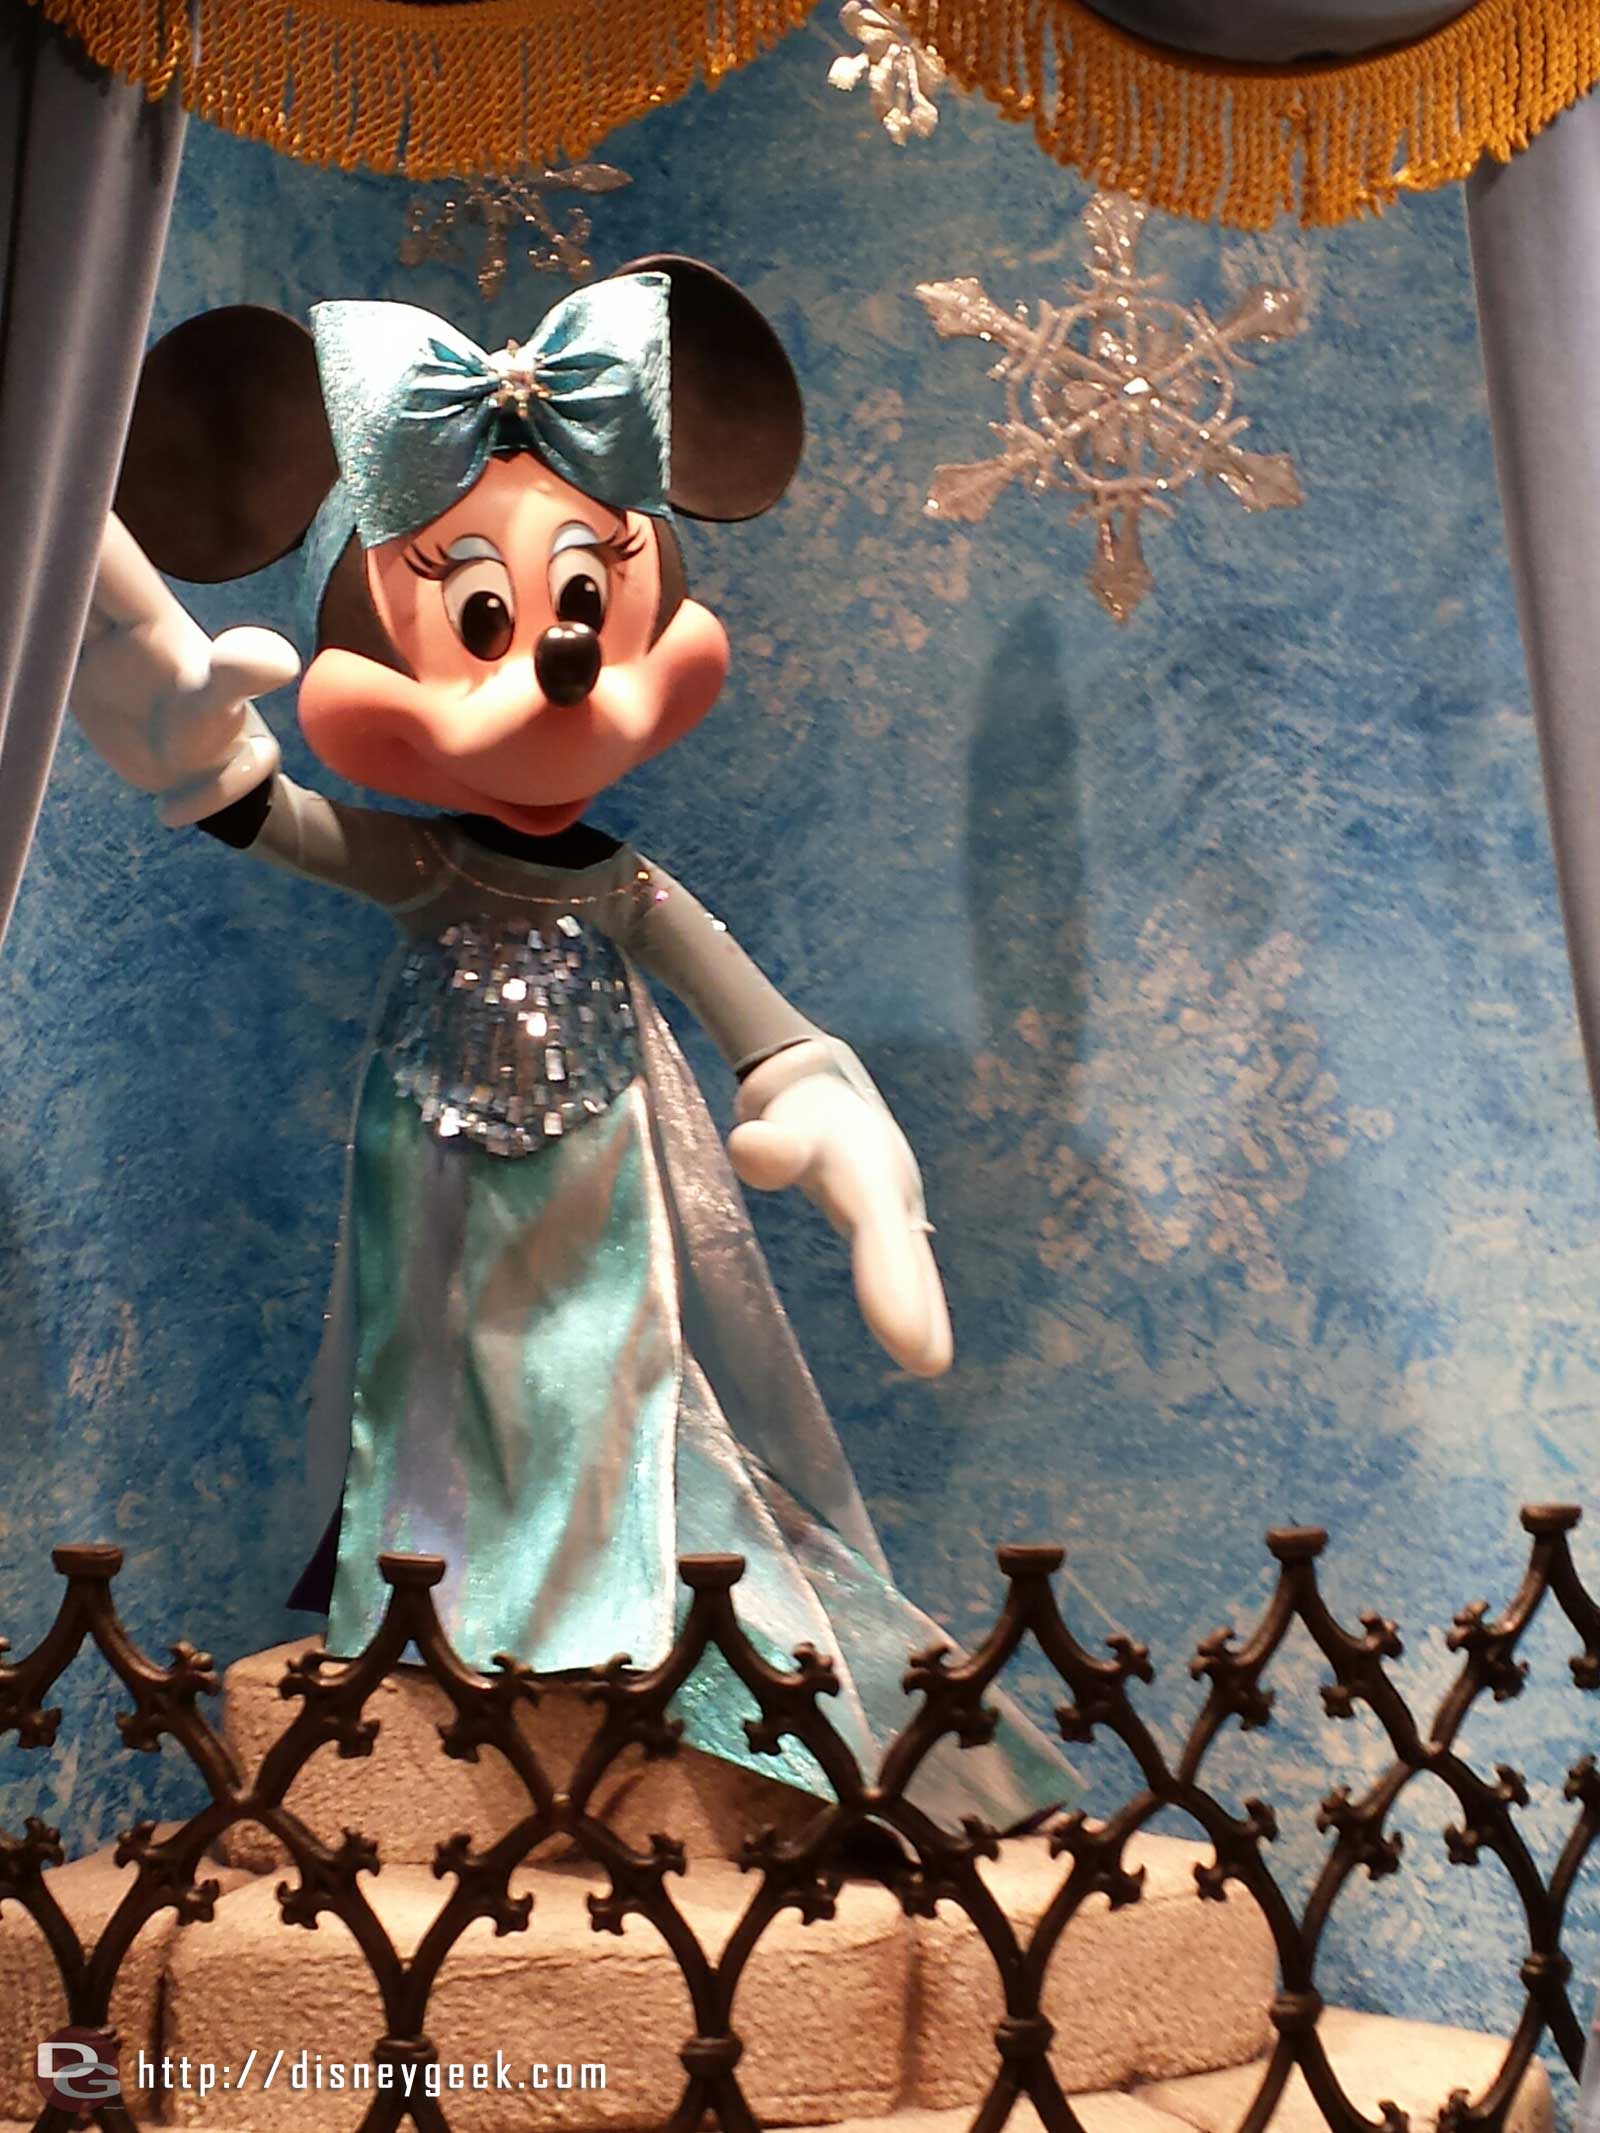 Minnie dressed as Elsa inside Sir Mickeys which now features a large selection of Frozen merchandise.